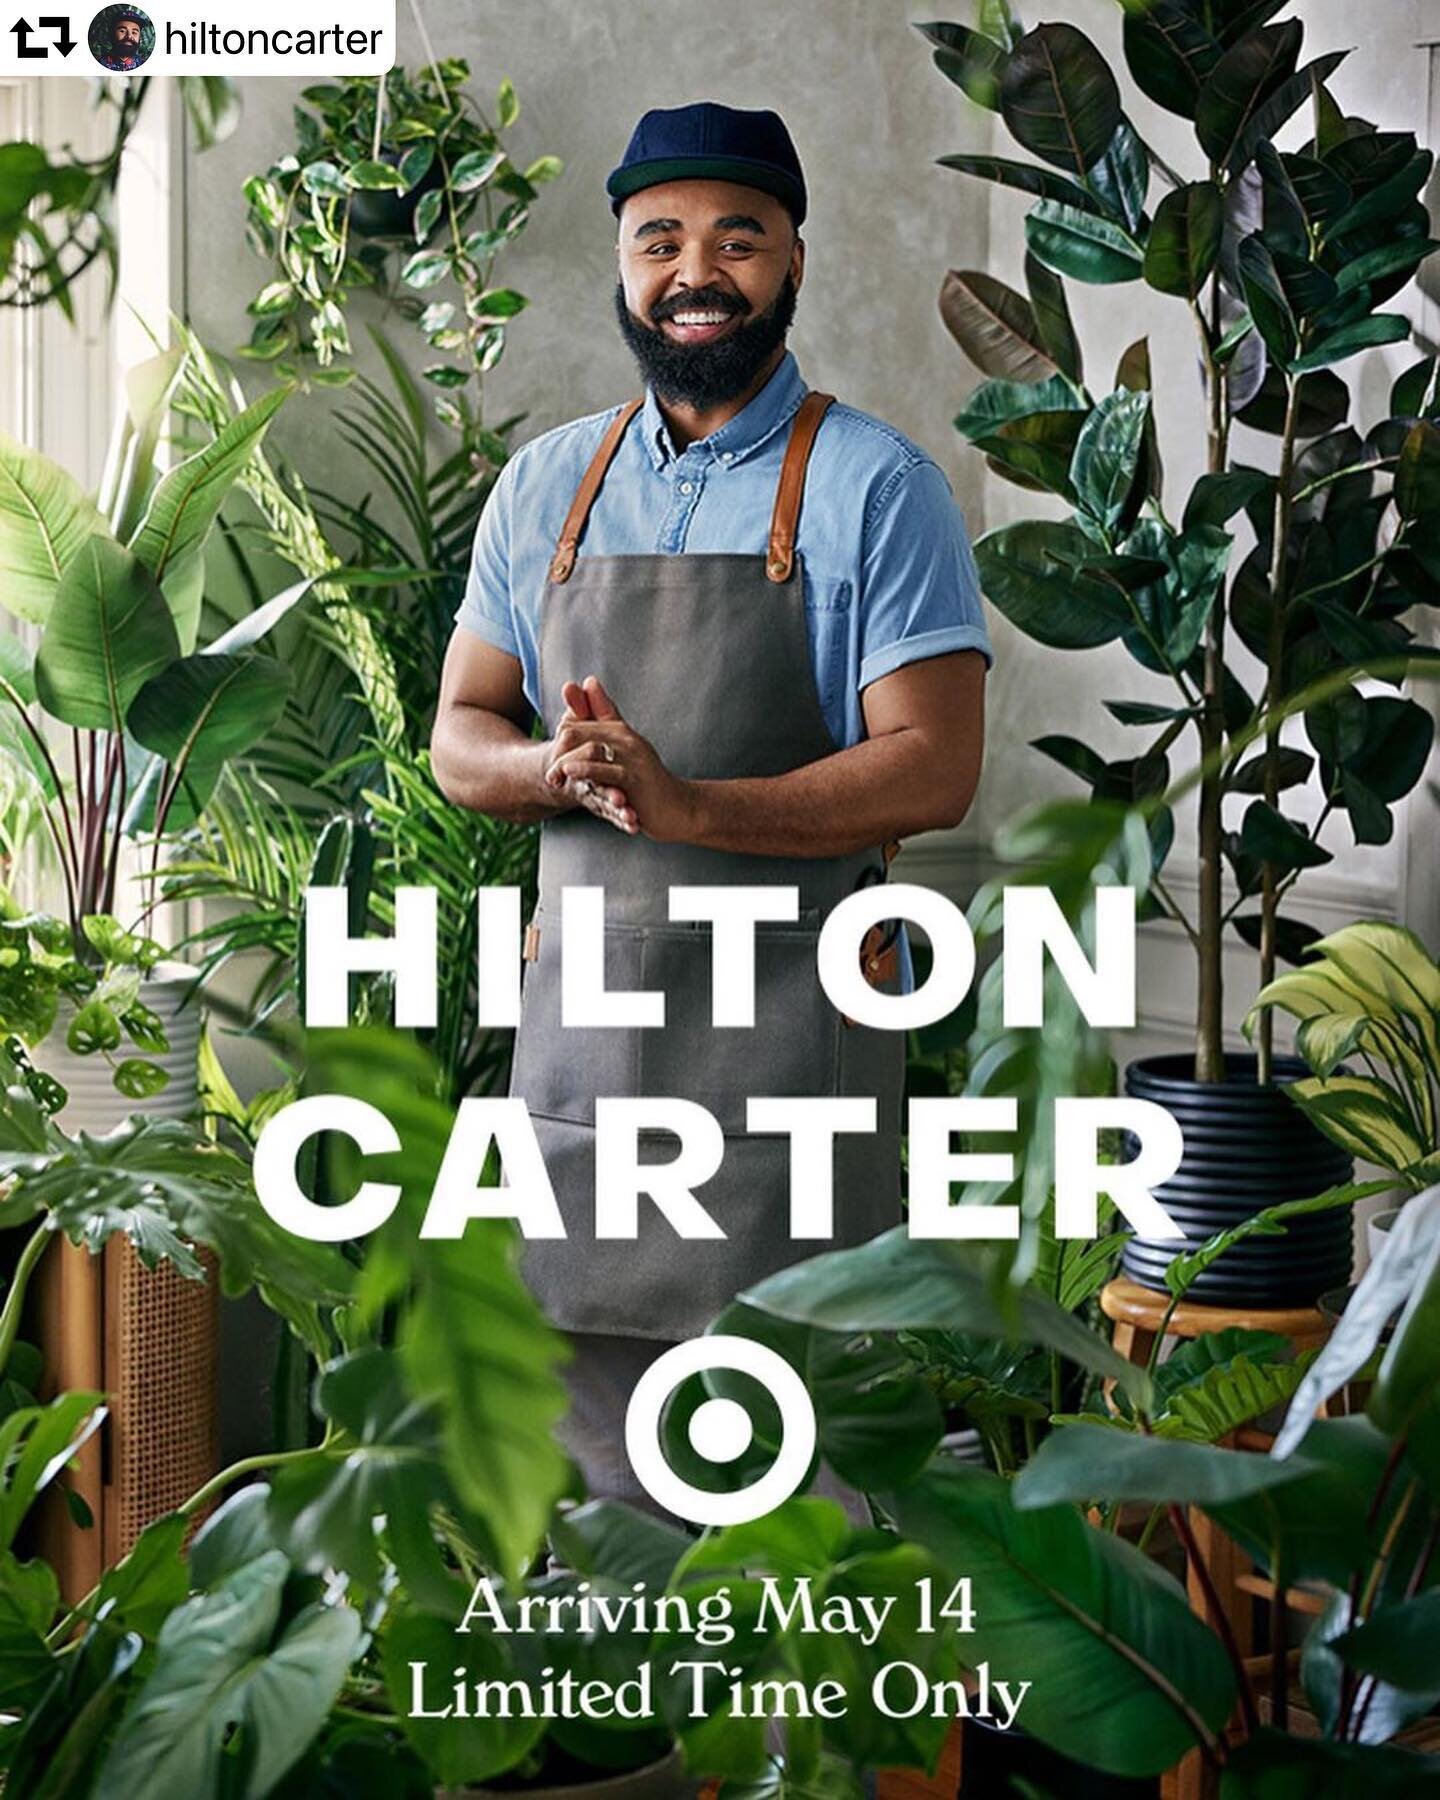 @hiltoncarter can&rsquo;t be stopped! We know this collection is going to be 🙌🪴🔥!! 

&ldquo;...a mix of planters, propagation vessels, terrariums, tools of the trade, faux plants and live plants...!!!&rdquo;

@target // May 14th

. . .
#targetcoll